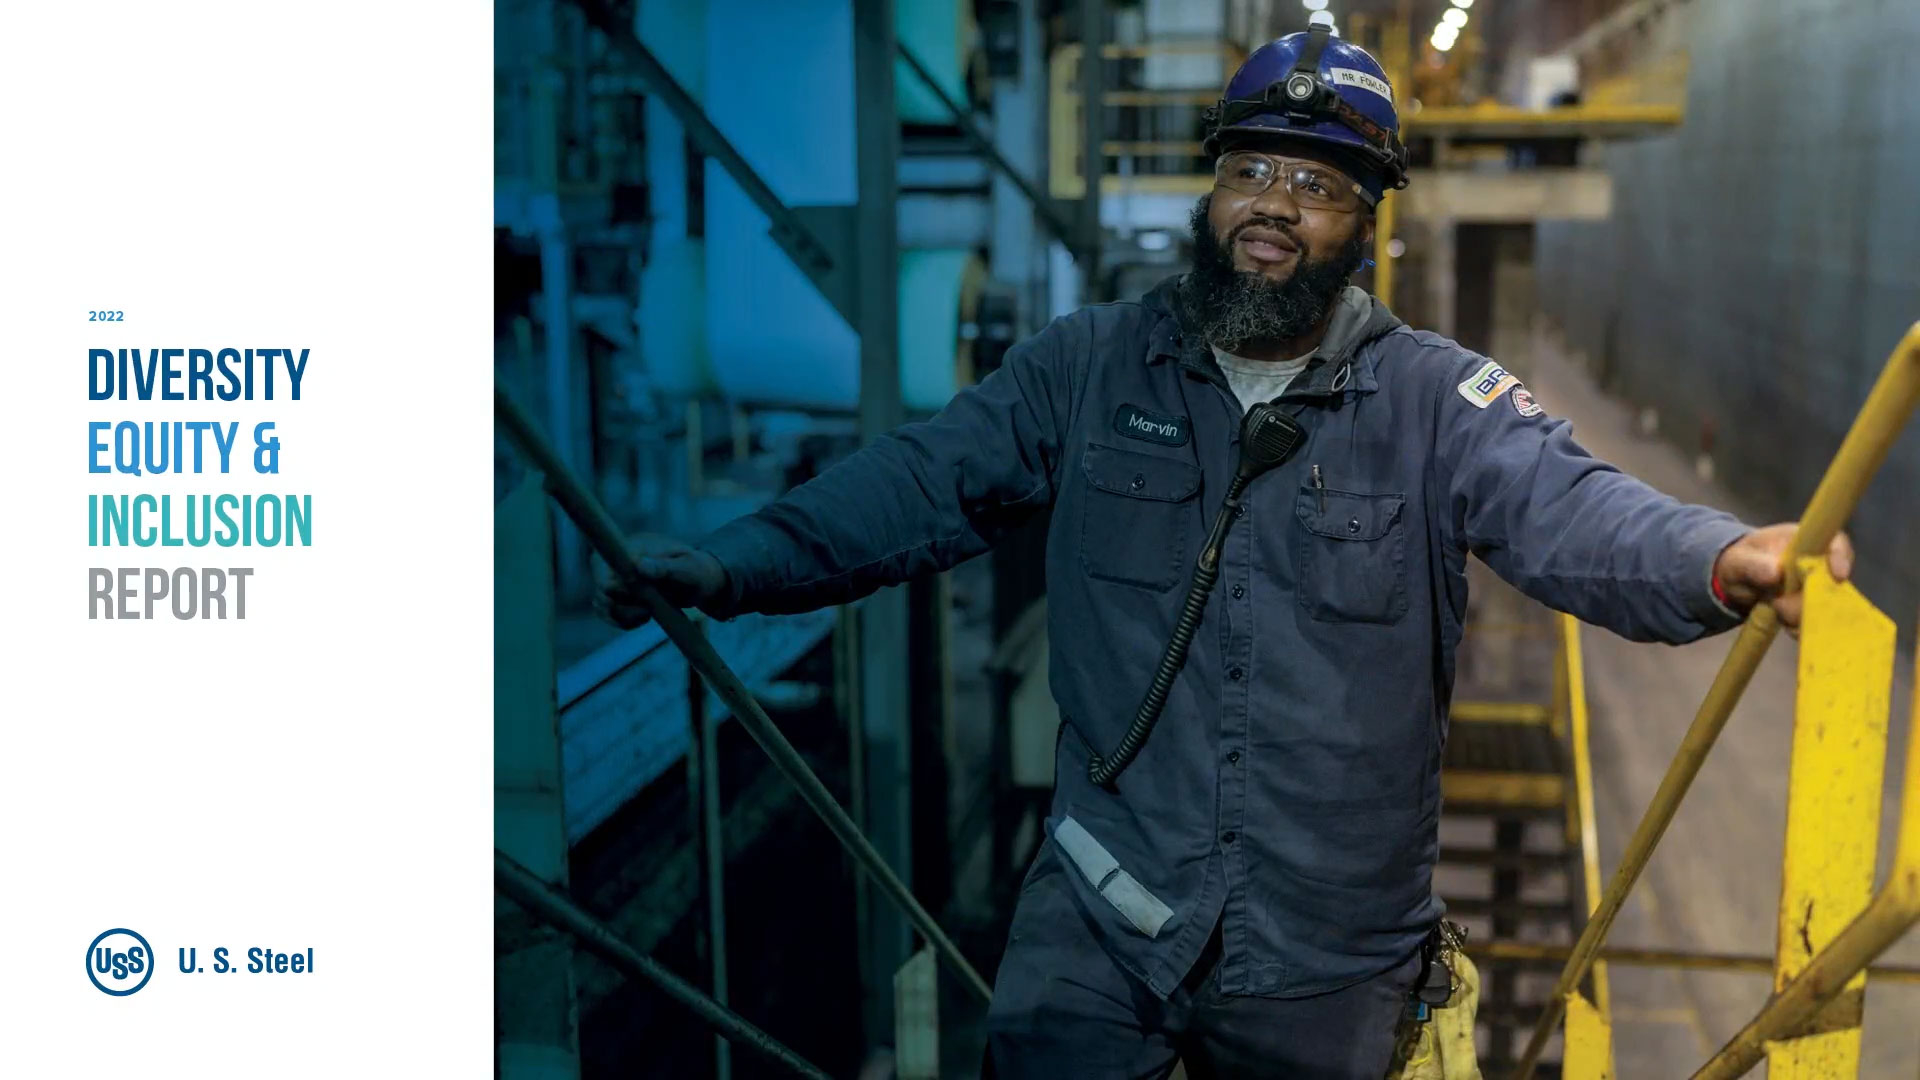 U. S. Steel’s 2022 Diversity, Equity and Inclusion Report highlights continued progress in initiatives that foster more diverse, equitable and inclusive workplaces.